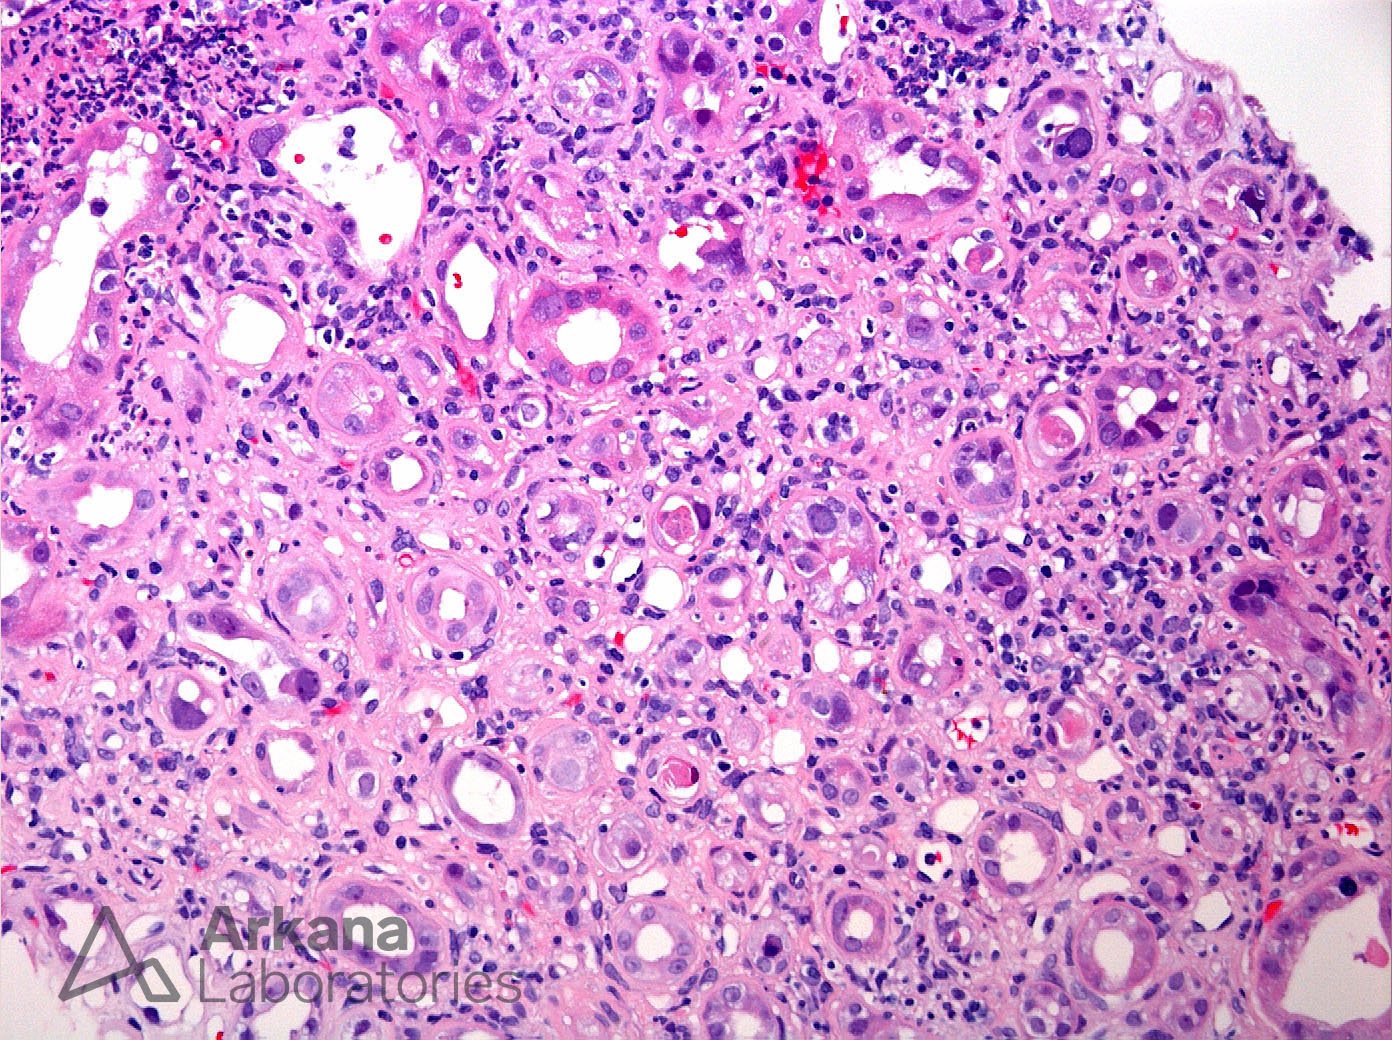 BK Nephritis with Nuclear Inclusions in a Transplant on H&E